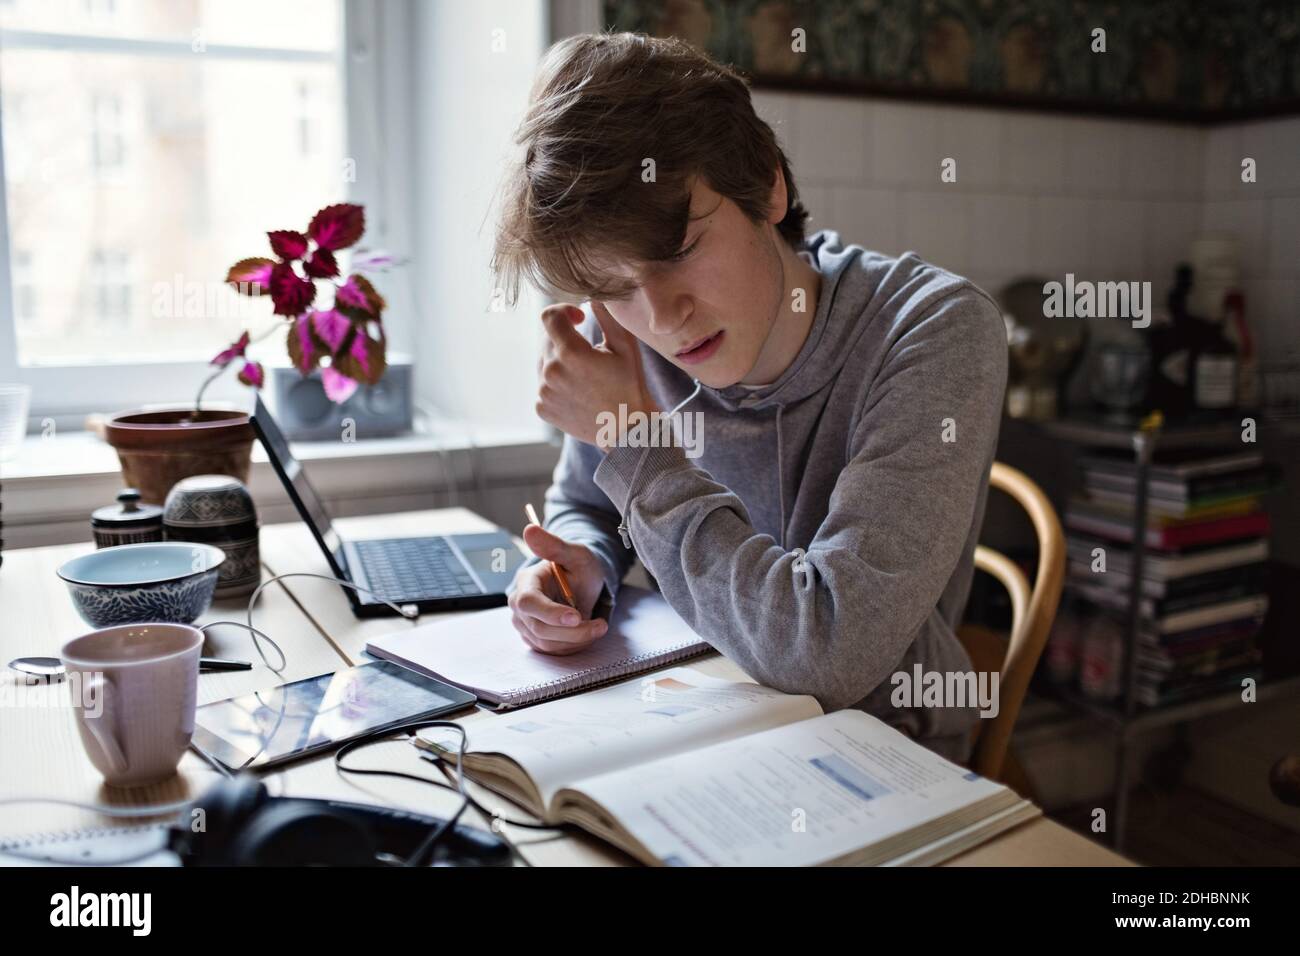 Serious teenage boy reading book while doing homework at home Stock Photo